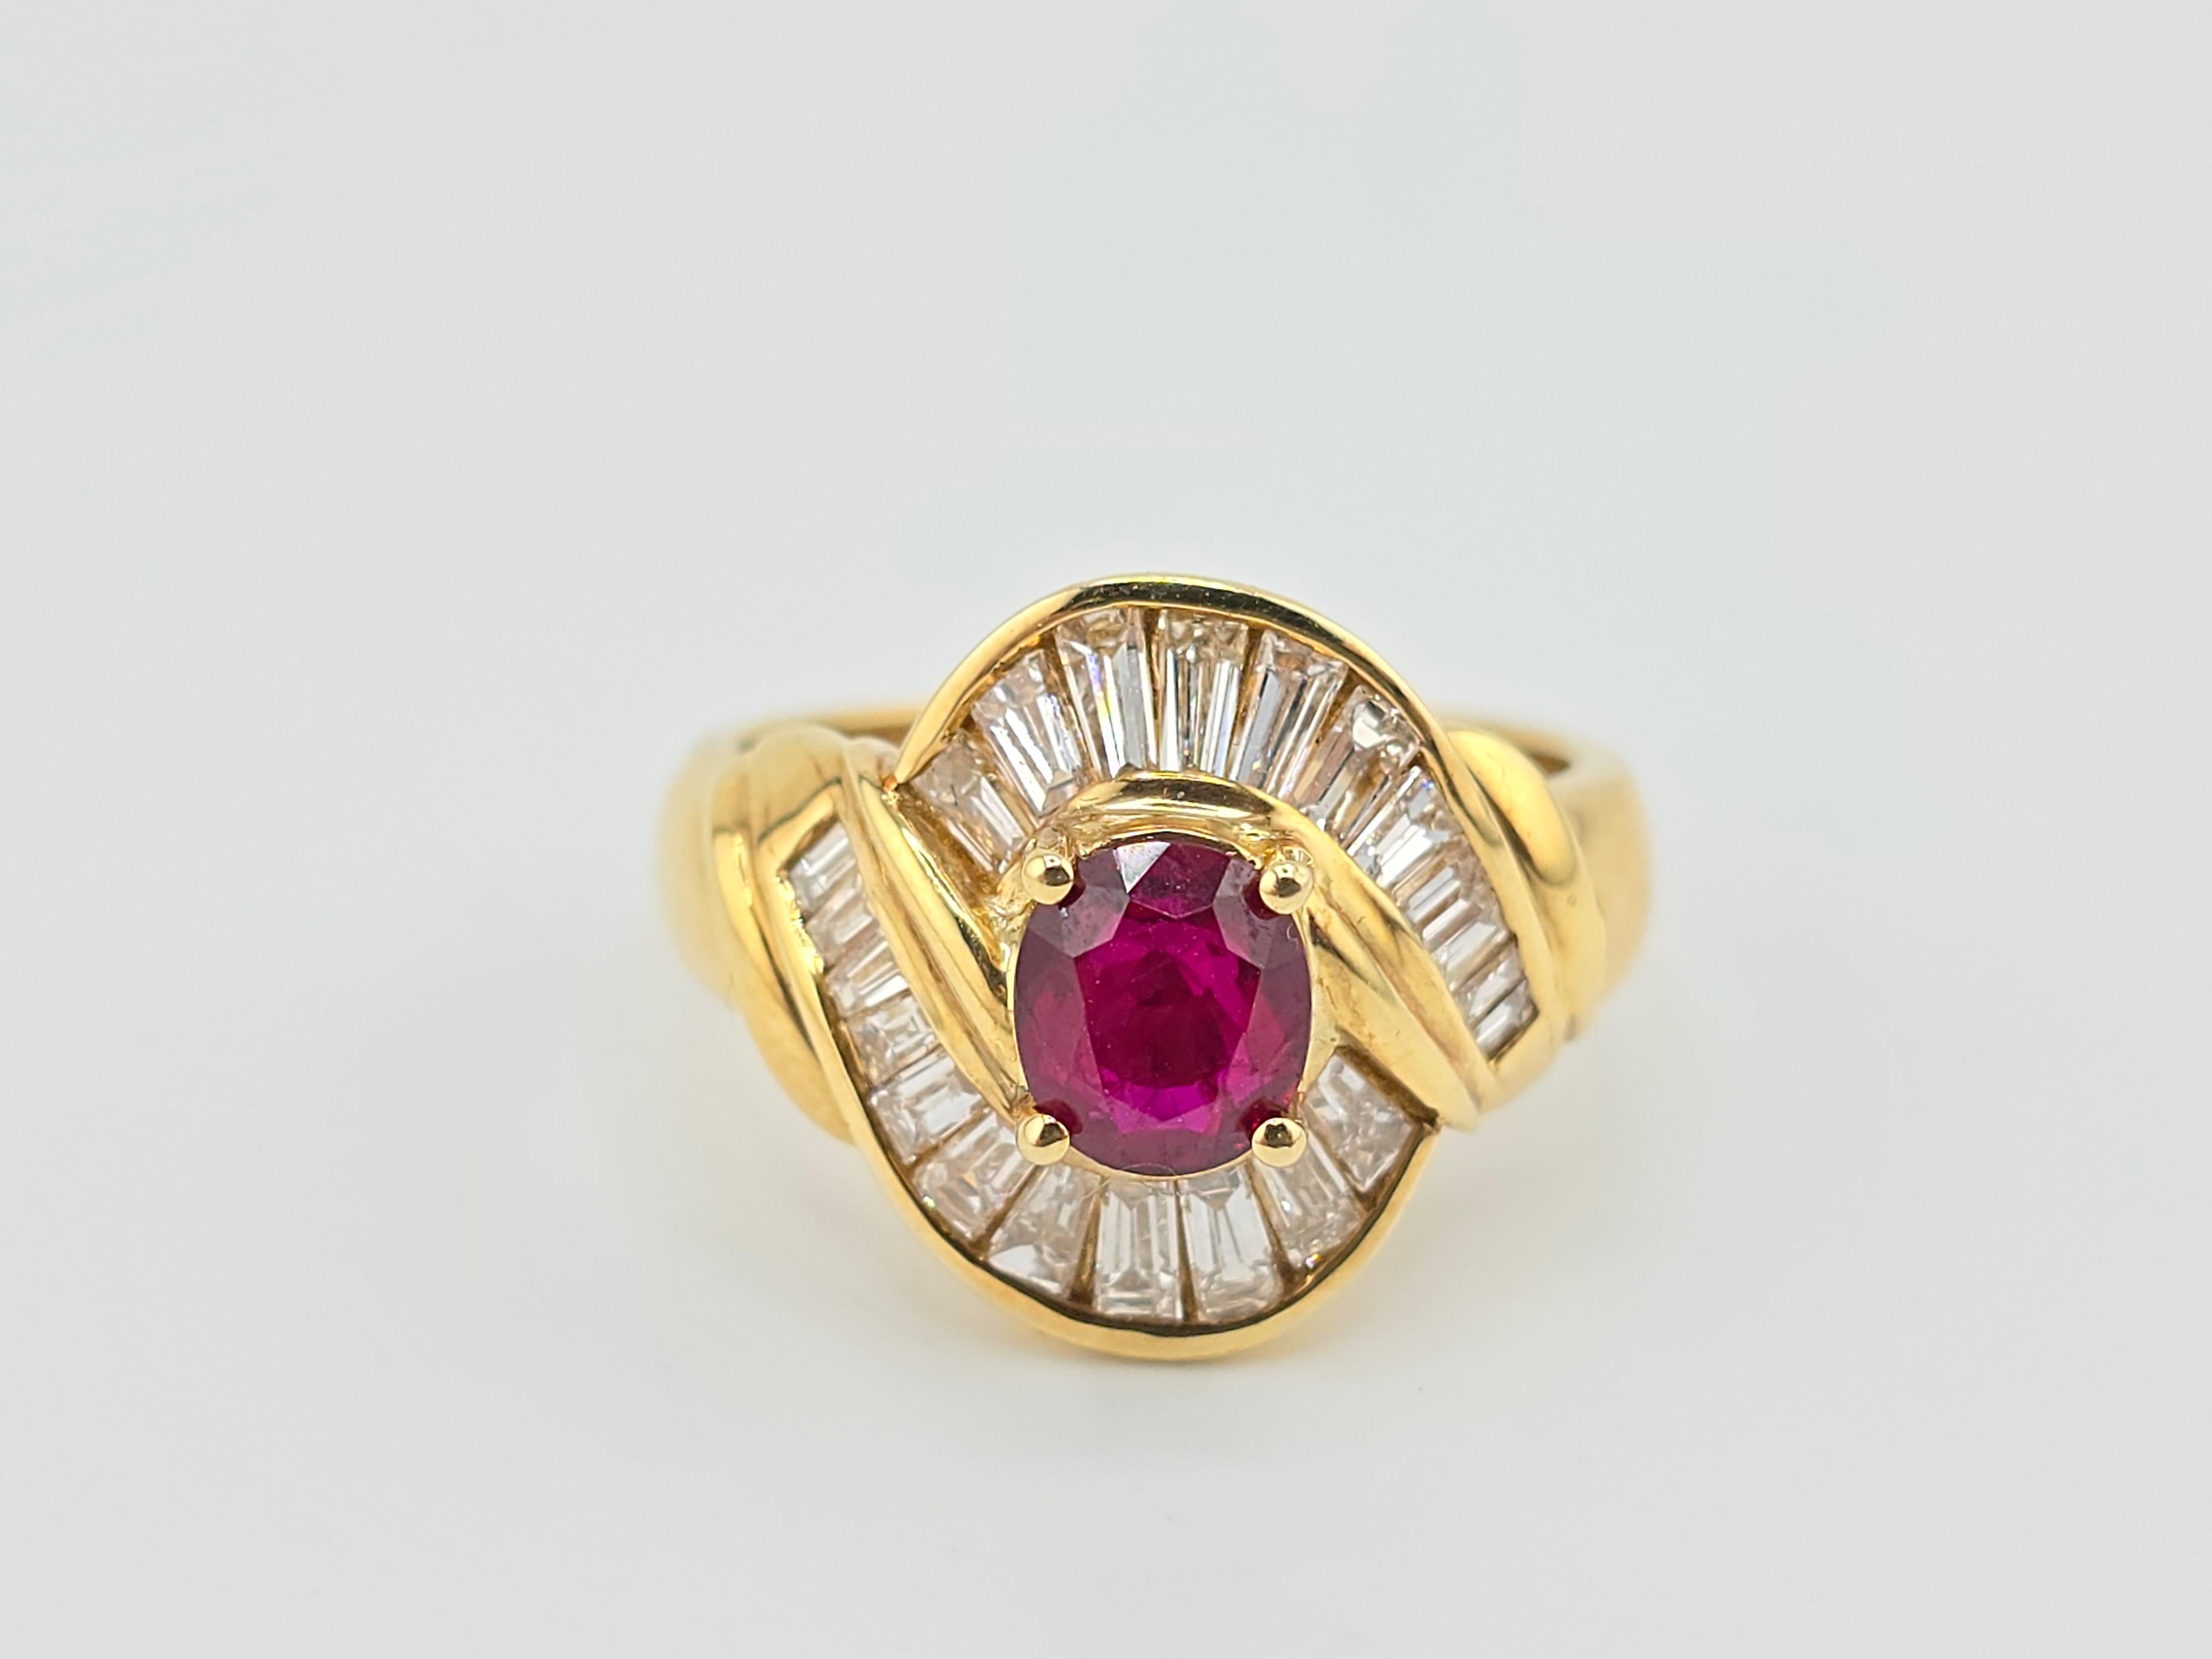 This is an excellent rich, vivid Ruby Ring, with beautiful diamonds all around. It is made out of 18 karat solid yellow gold. The saturation and the color on the ruby is phenomenal. Most likely Mozambique or Burma origin.  The quality of the